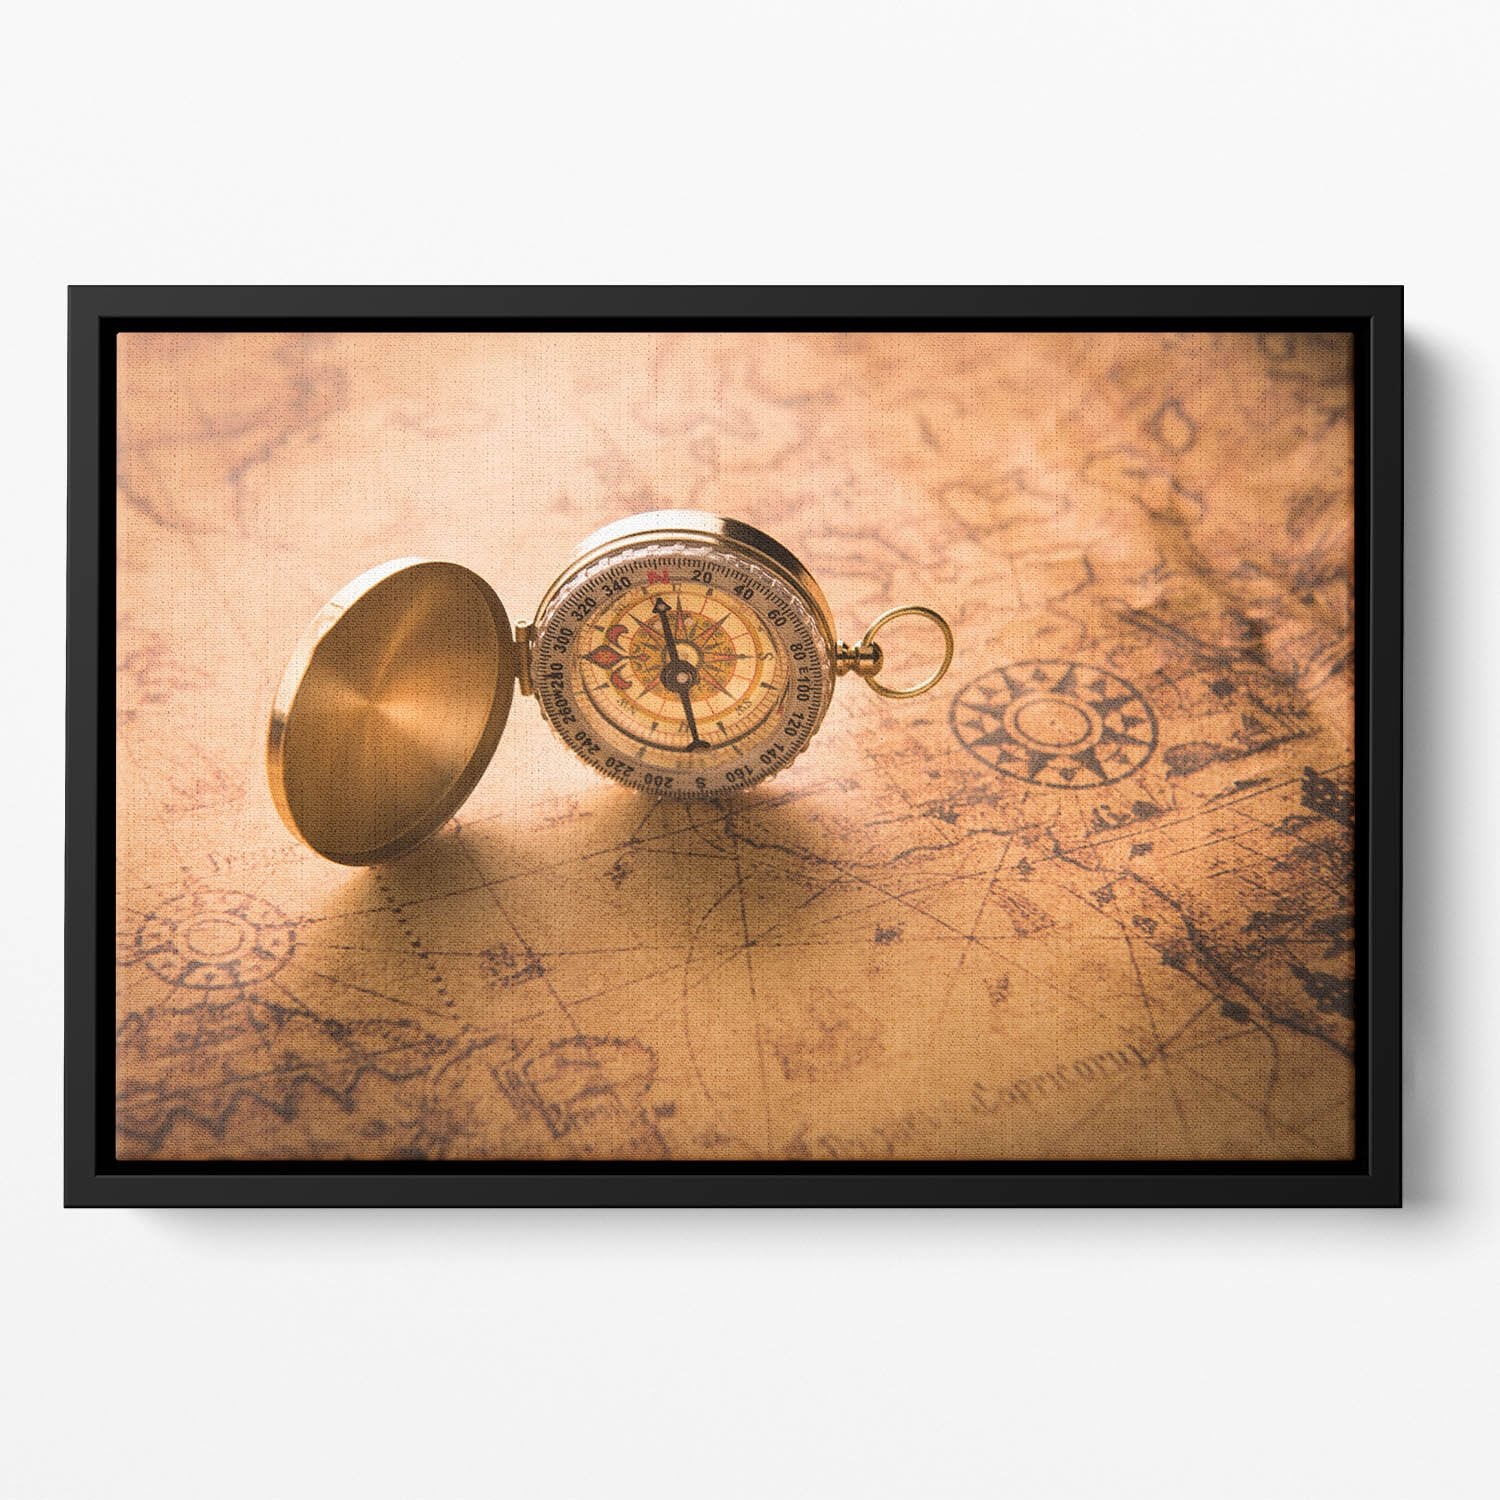 Compass on old map vintage style Floating Framed Canvas